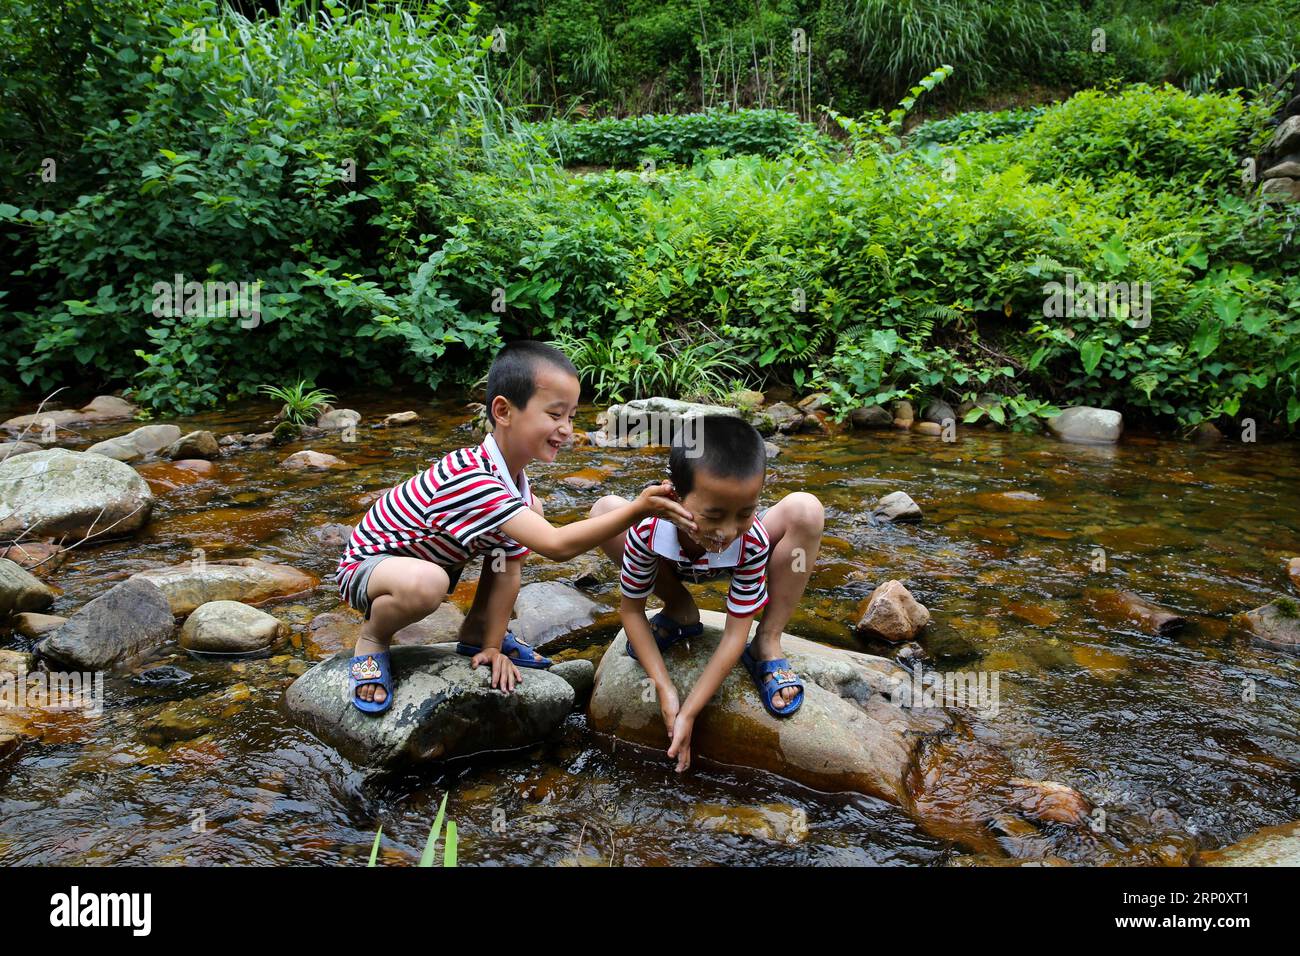 (180529) -- NANCHANG, May 29, 2018 -- Nine-year-old Huang Guanhao (L) and his twin brother Huang Guanping play by a stream in Suolong Village of Yudu County, east China s Jiangxi Province, May 23, 2018. With about 1,000 residents, Suolong Village has 29 cases of multiple births, a high rate considering the modest population size. ) (lmm) CHINA-JIANGXI-VILLAGE-MULTIPLE BIRTHS-TWINS-LIFE (CN) PanxSiwei PUBLICATIONxNOTxINxCHN Stock Photo